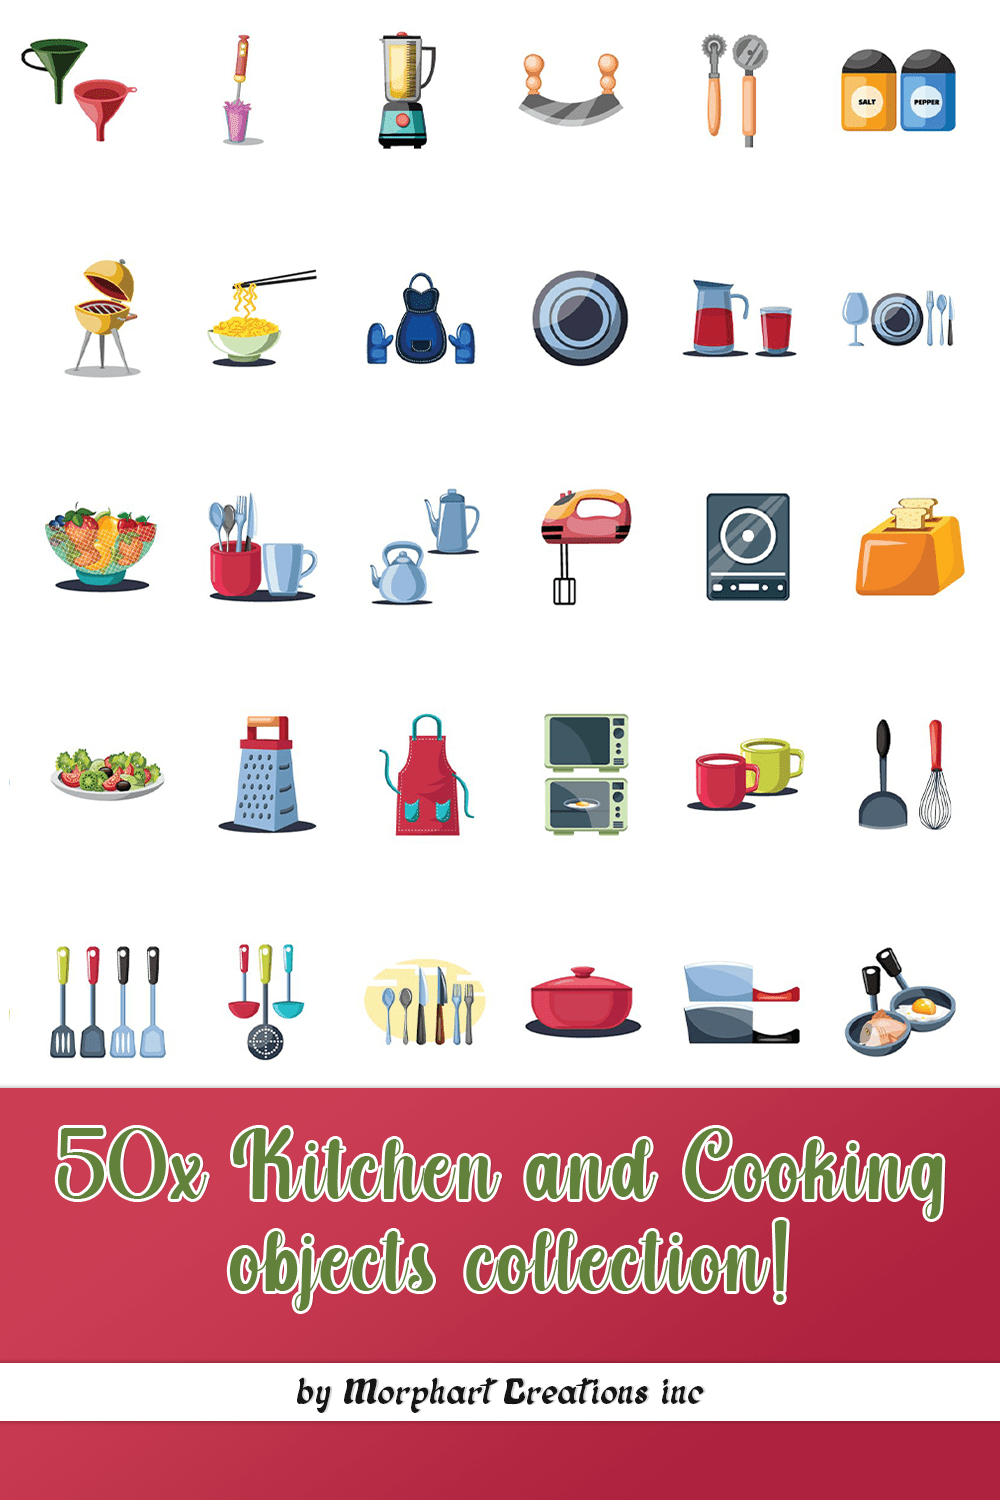 A selection of cartoon images of objects for the kitchen and cooking.